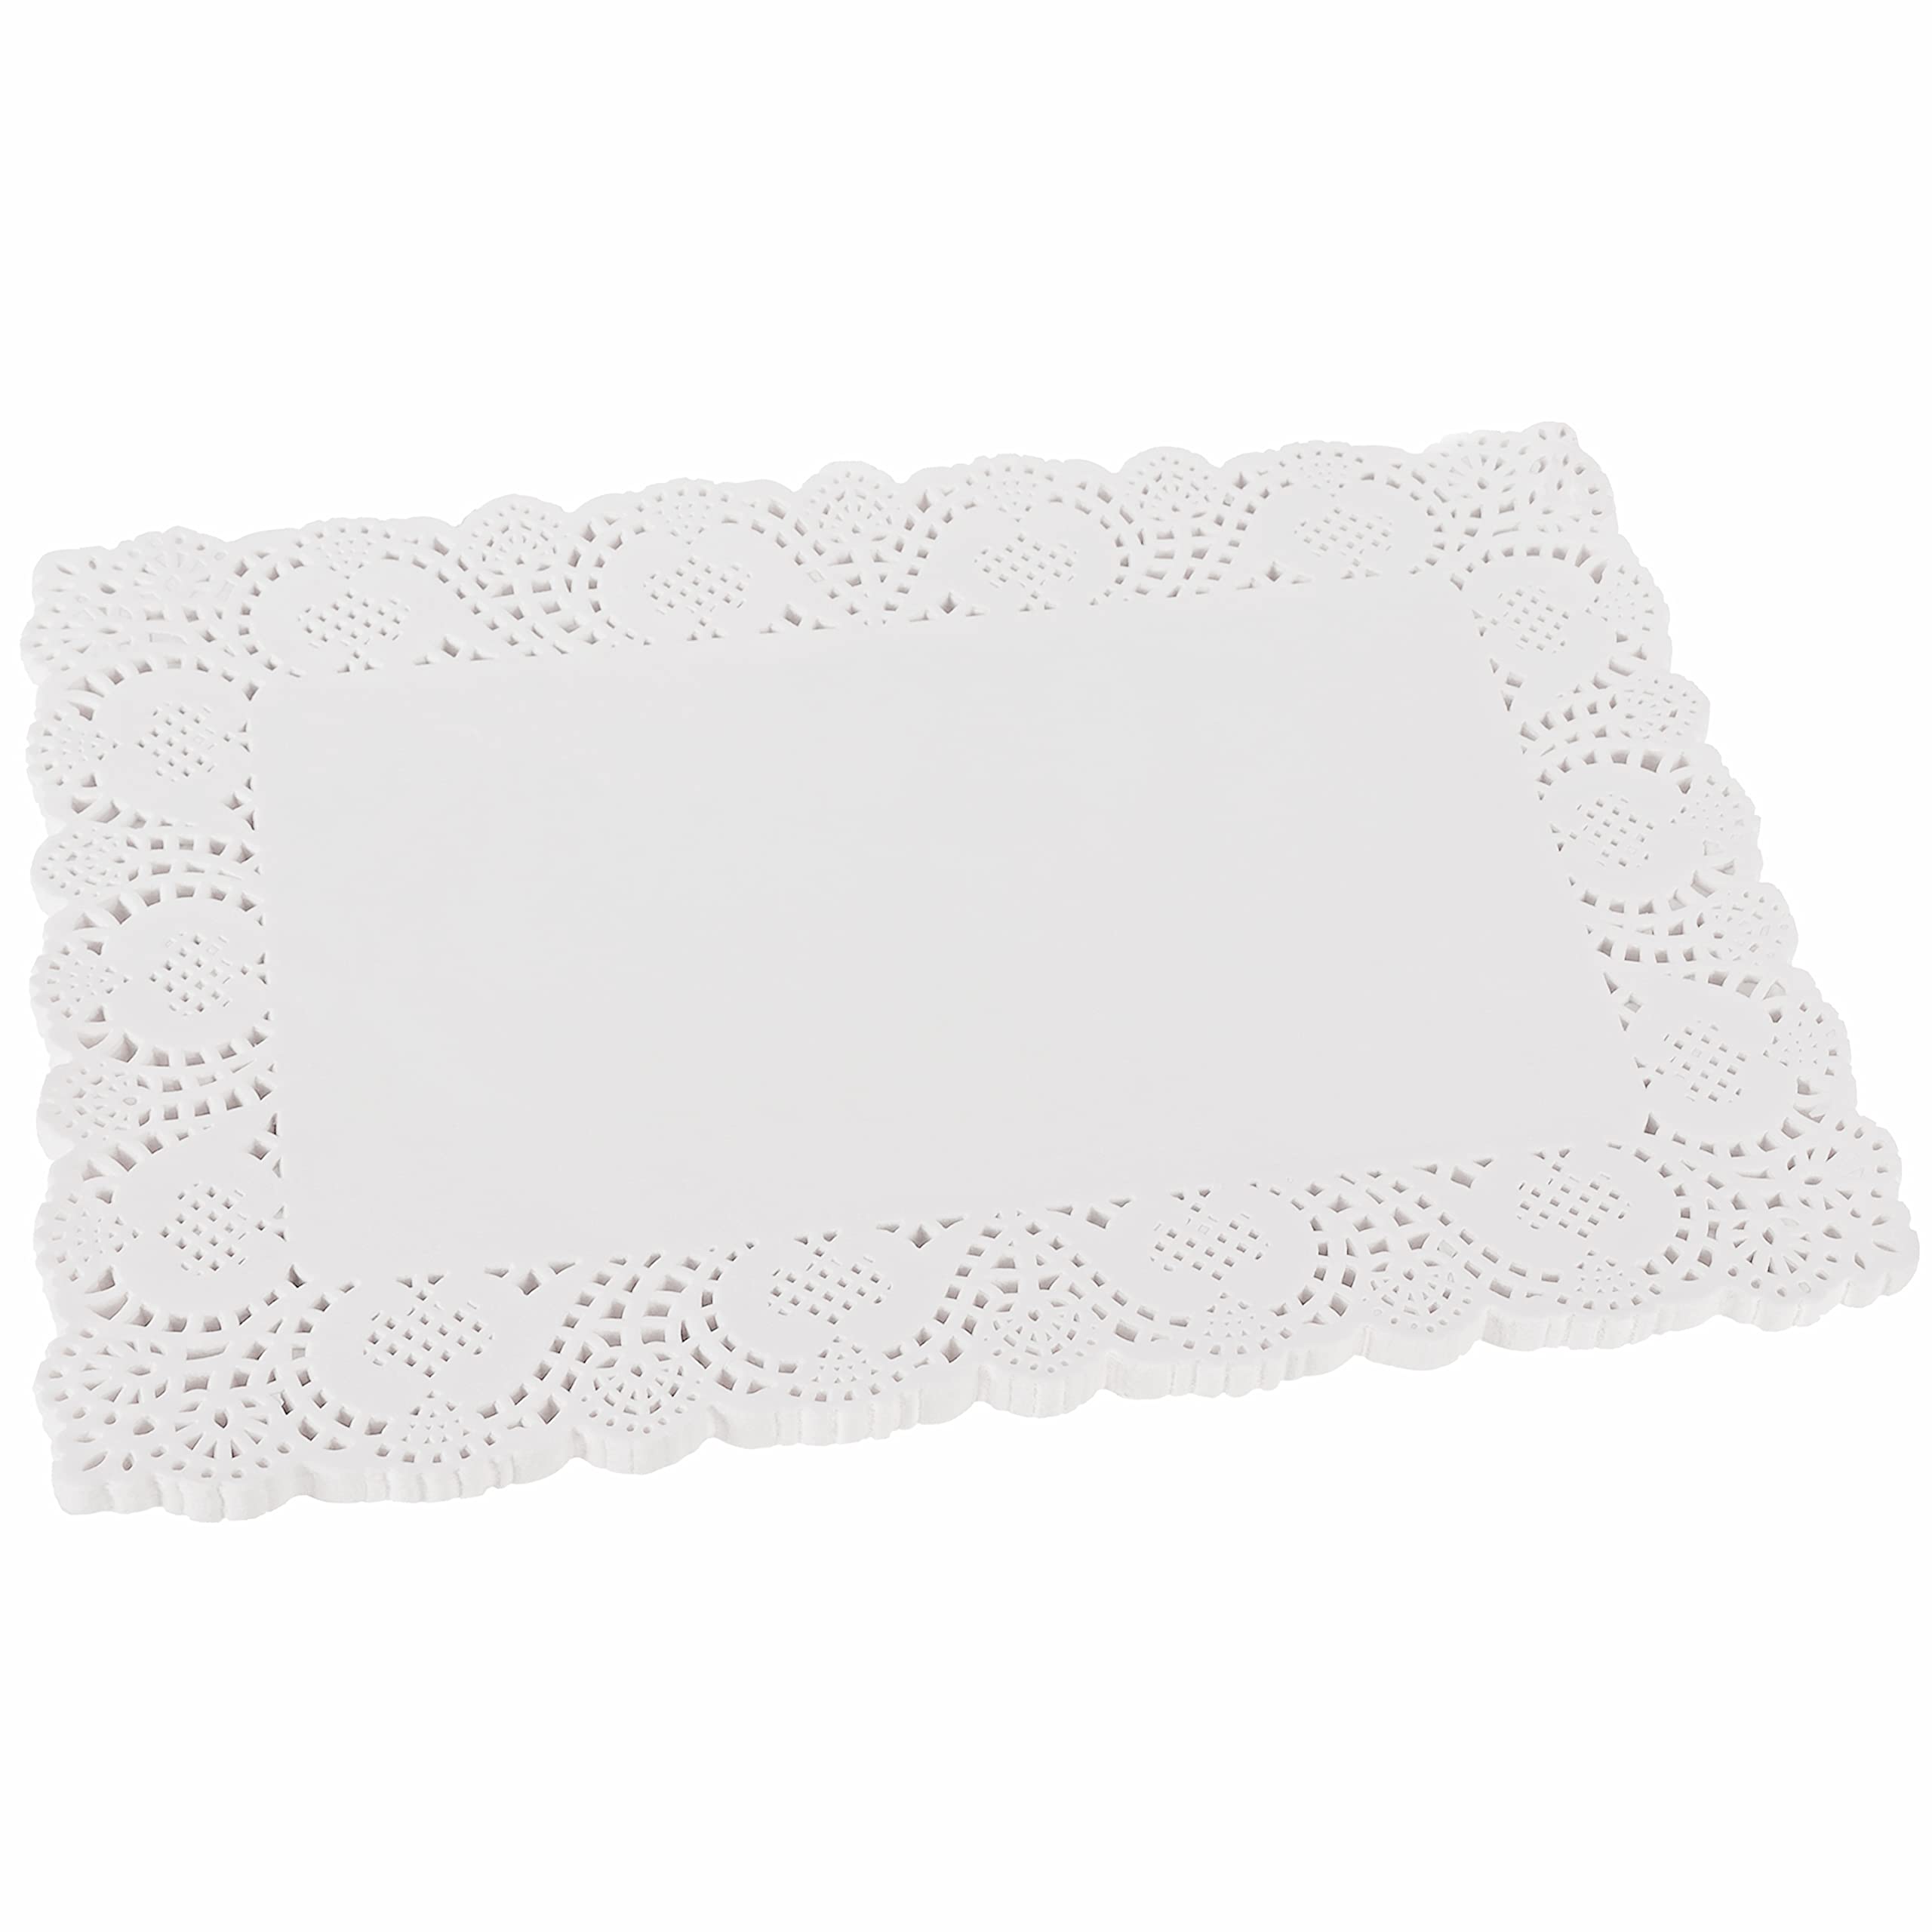 Belle Vous White Rectangle Lace Paper Doilies (100 Pack) - 36.5 x 26cm / 14.37 x 10.24 inches - Tableware for Cake, Wedding Decoration Placemats and Packaging